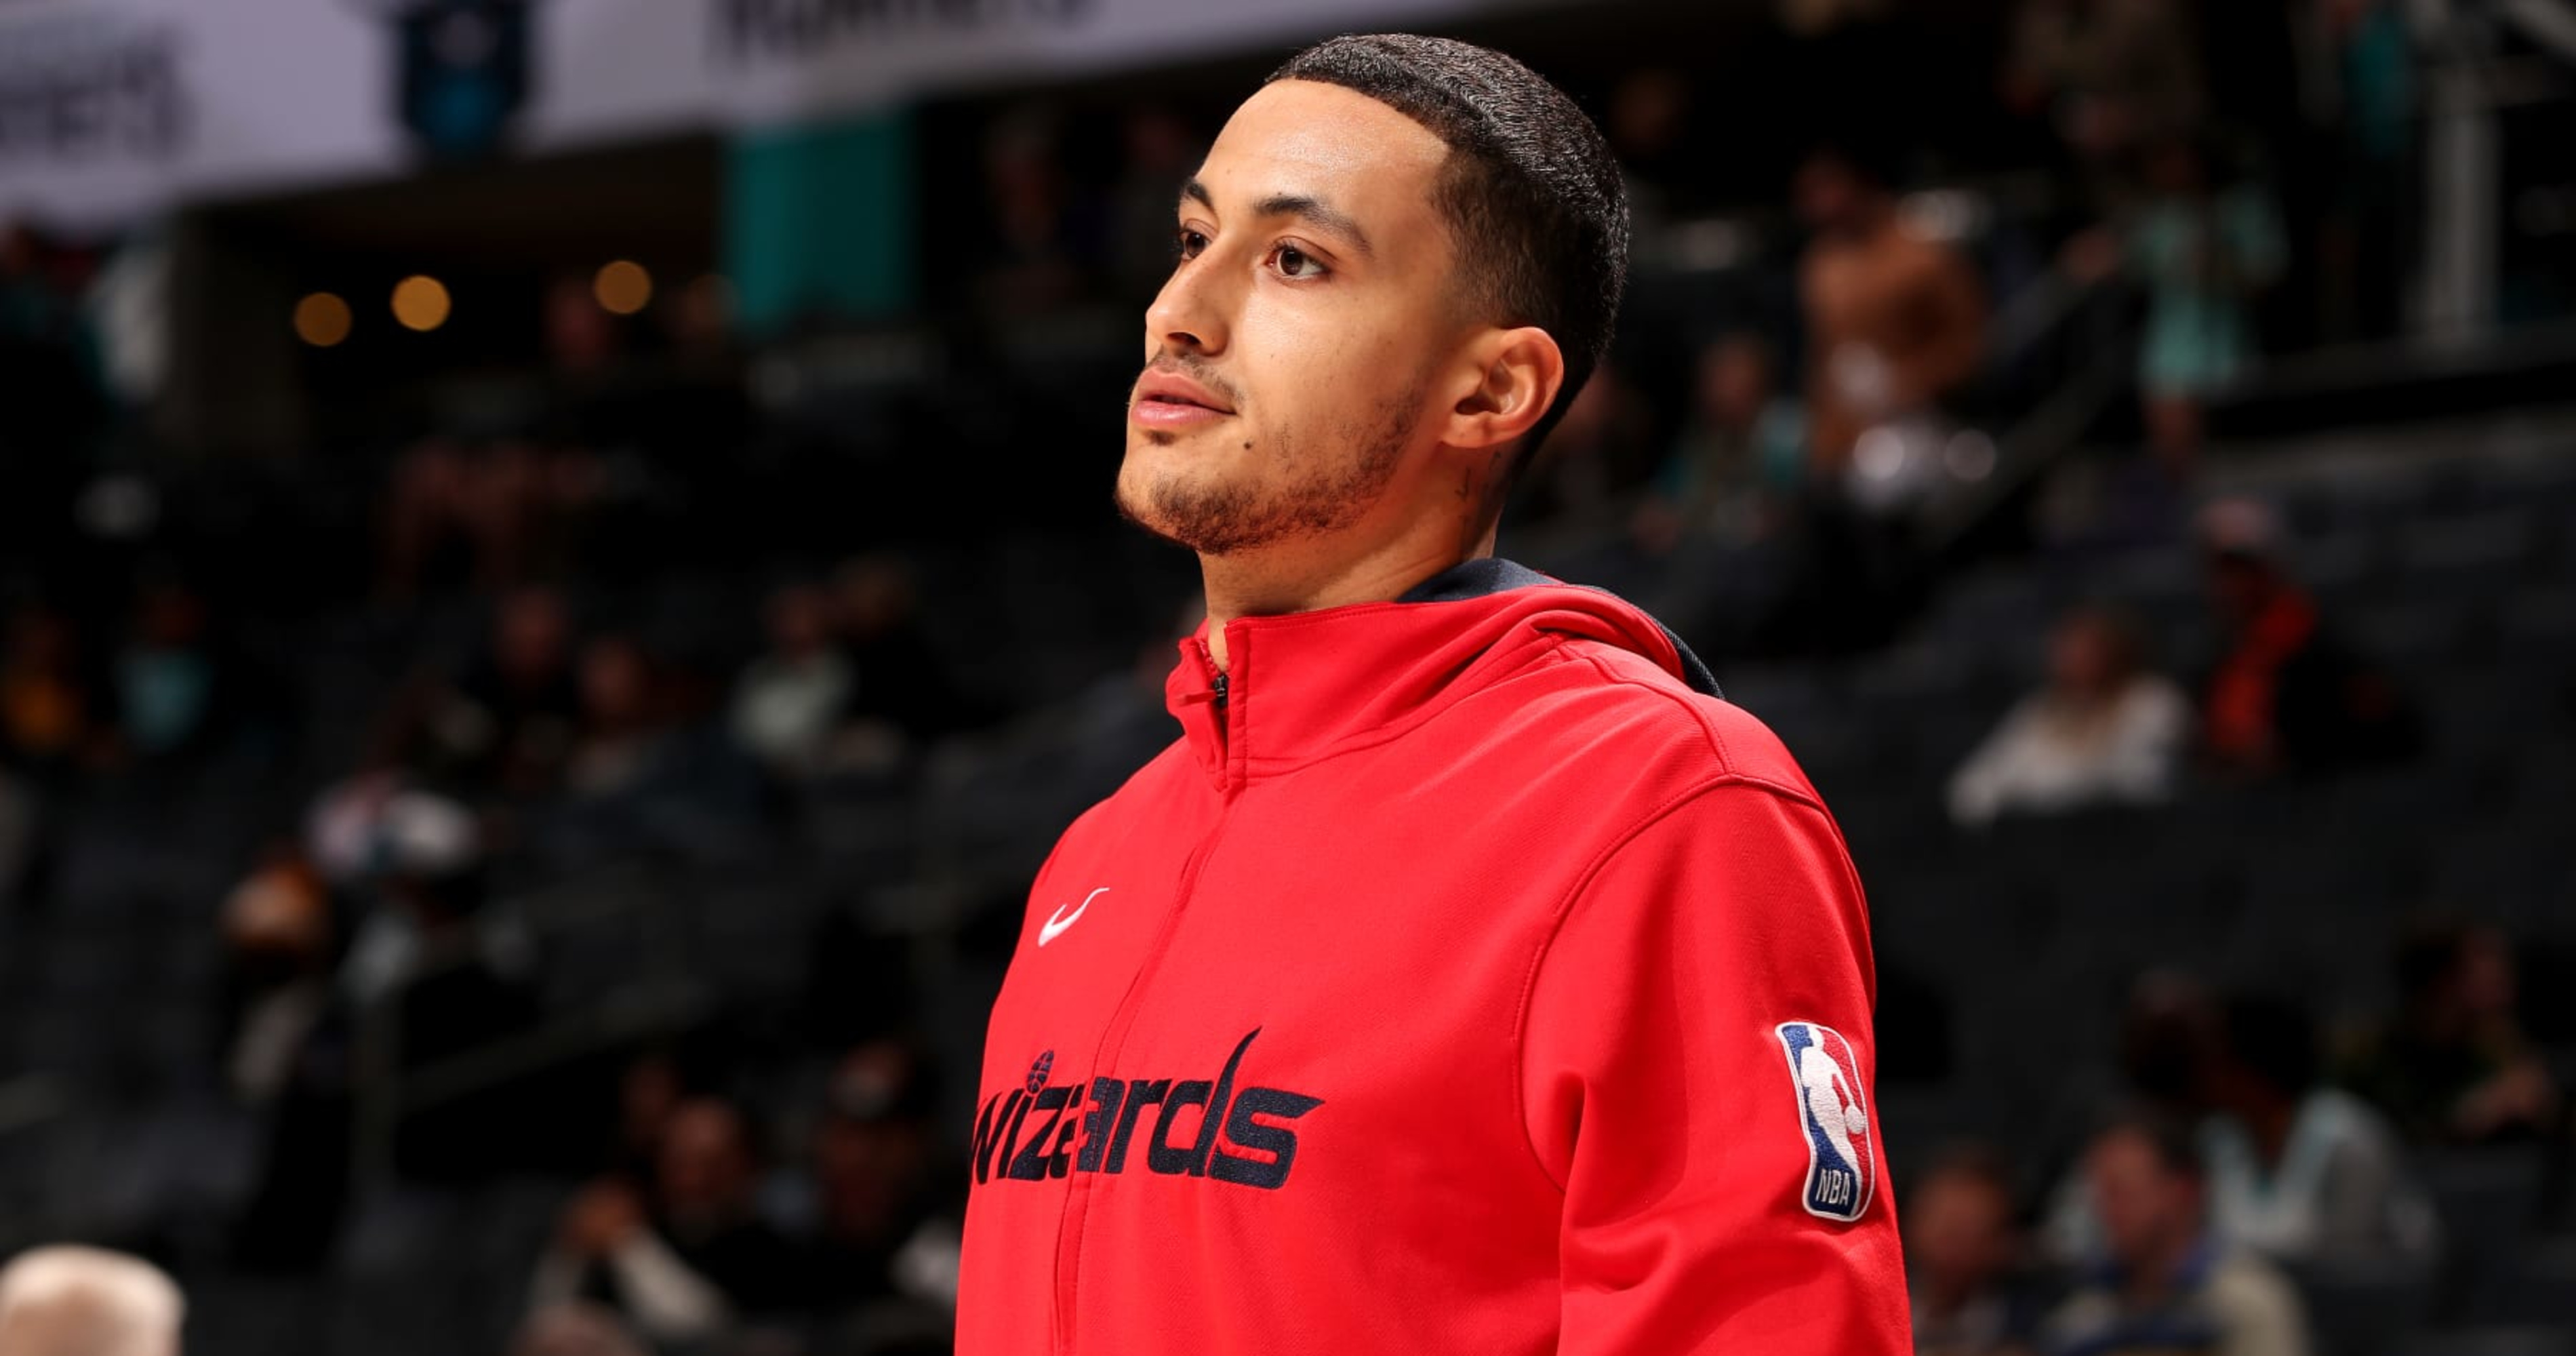 Kyle Kuzma from the NBA showing up in a new GORE-TEX jacket : r/seinfeld